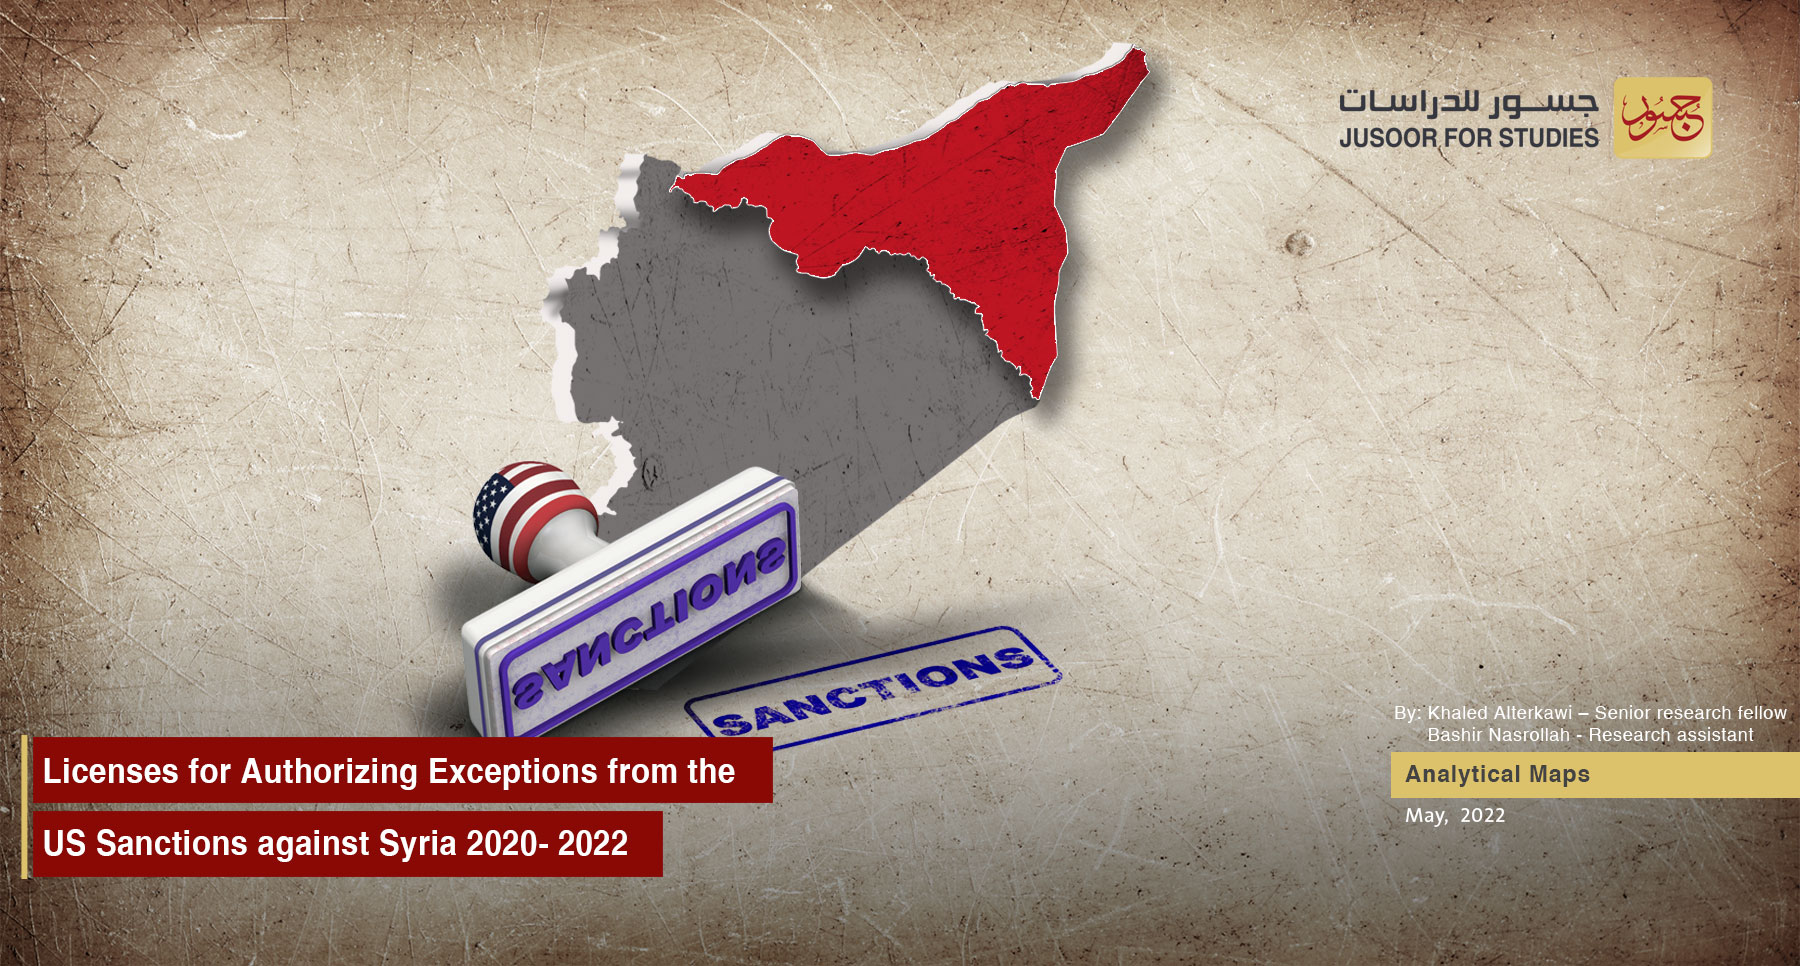 Licenses for Authorizing Exceptions from the US Sanctions against Syria 2020- 2022